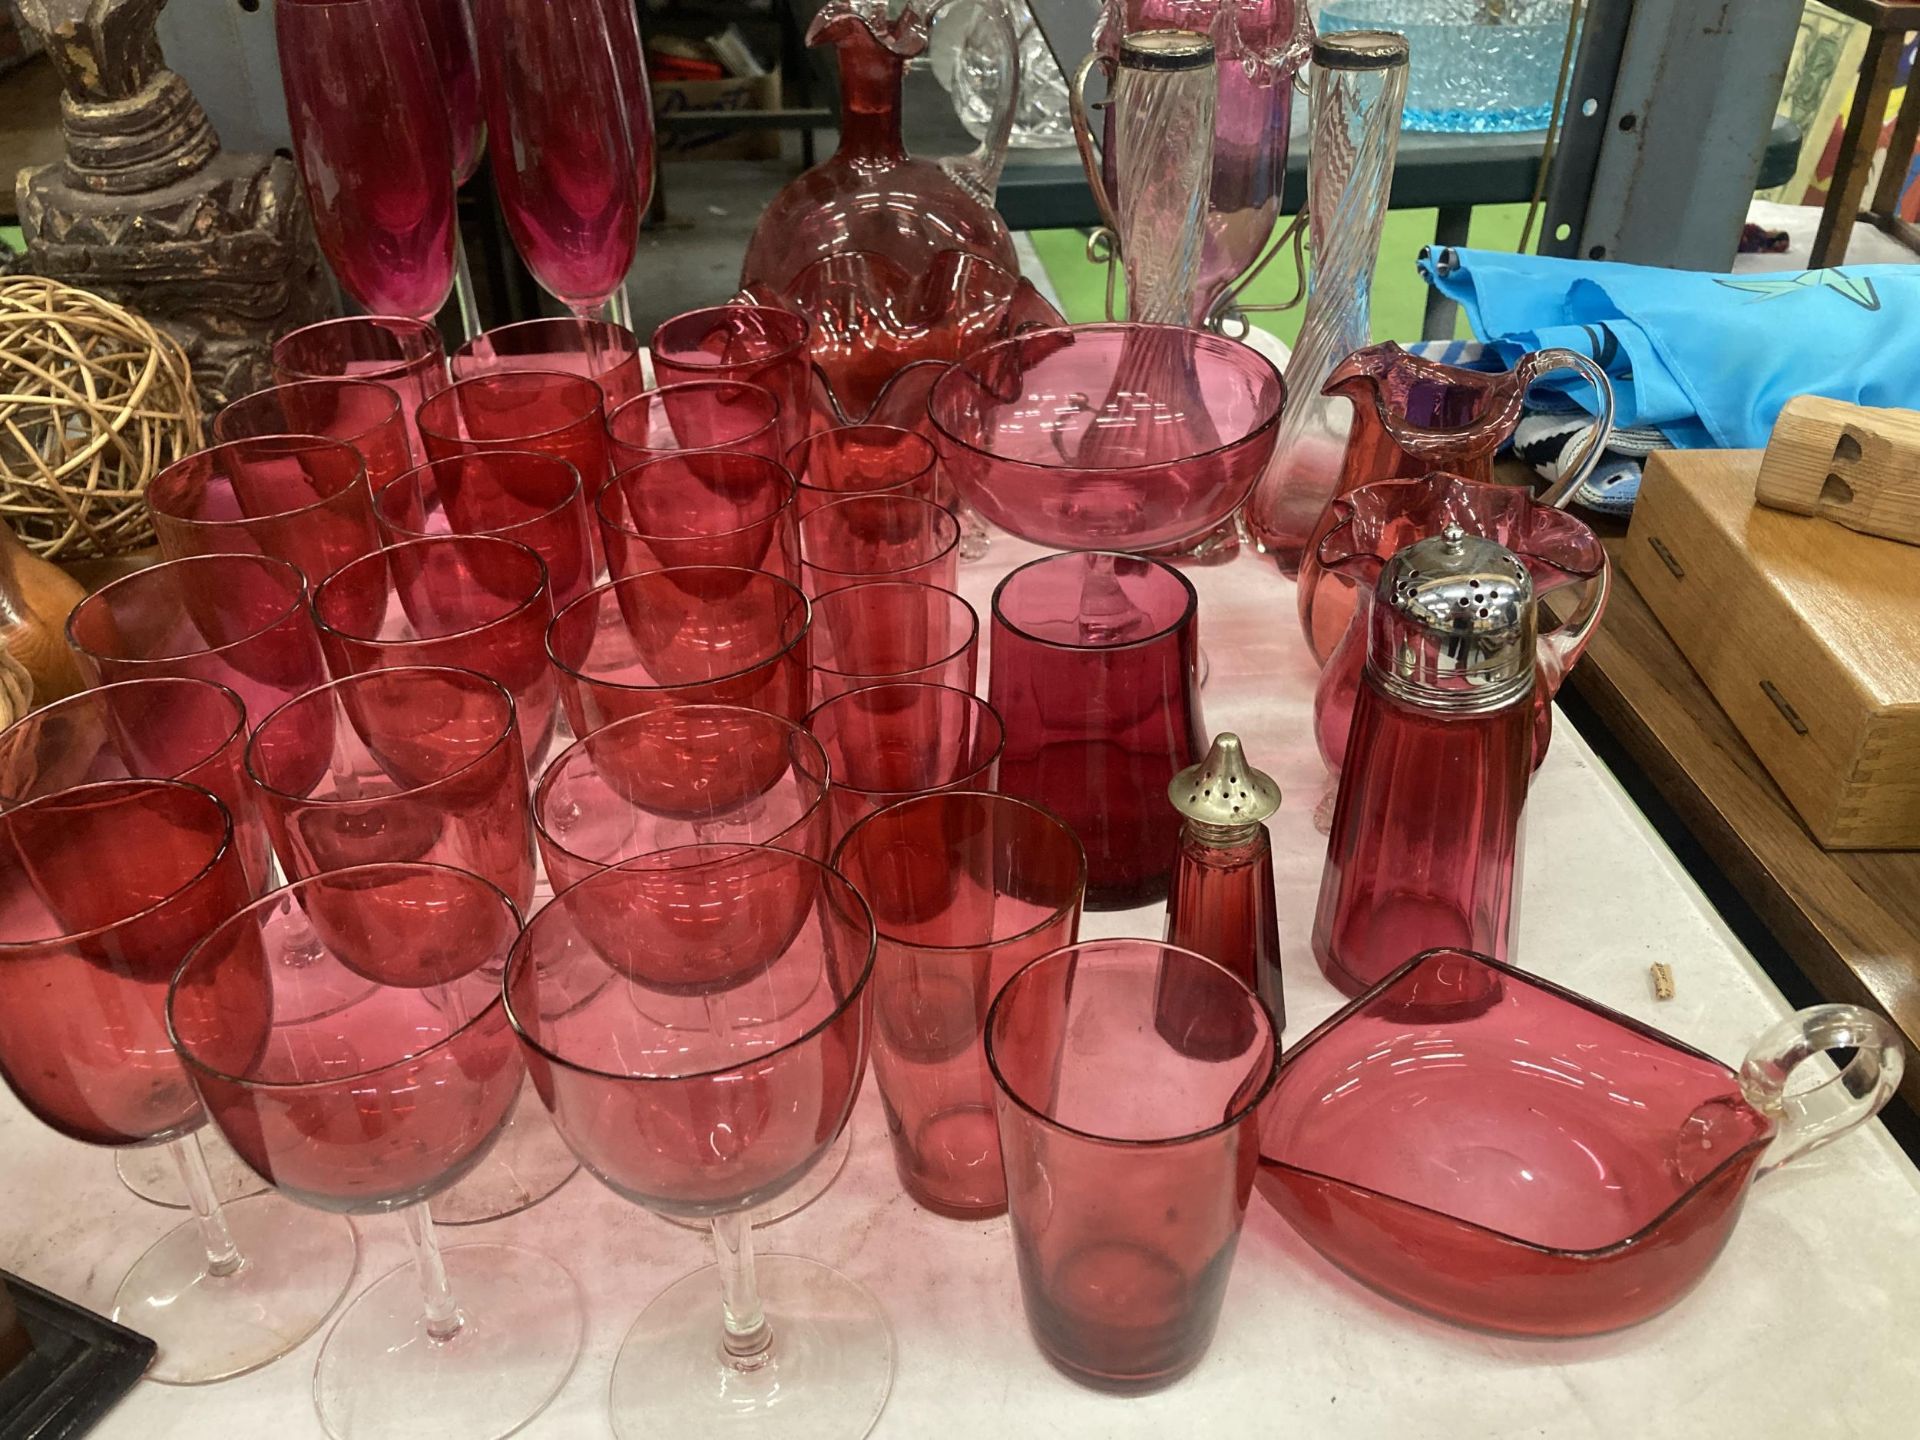 A LARGE QUANTITY OF CRANBERRY GLASS TO INCLUDE DRINKING GLASSES, VASES, JUGS, DECANTER, ETC., - Bild 3 aus 3